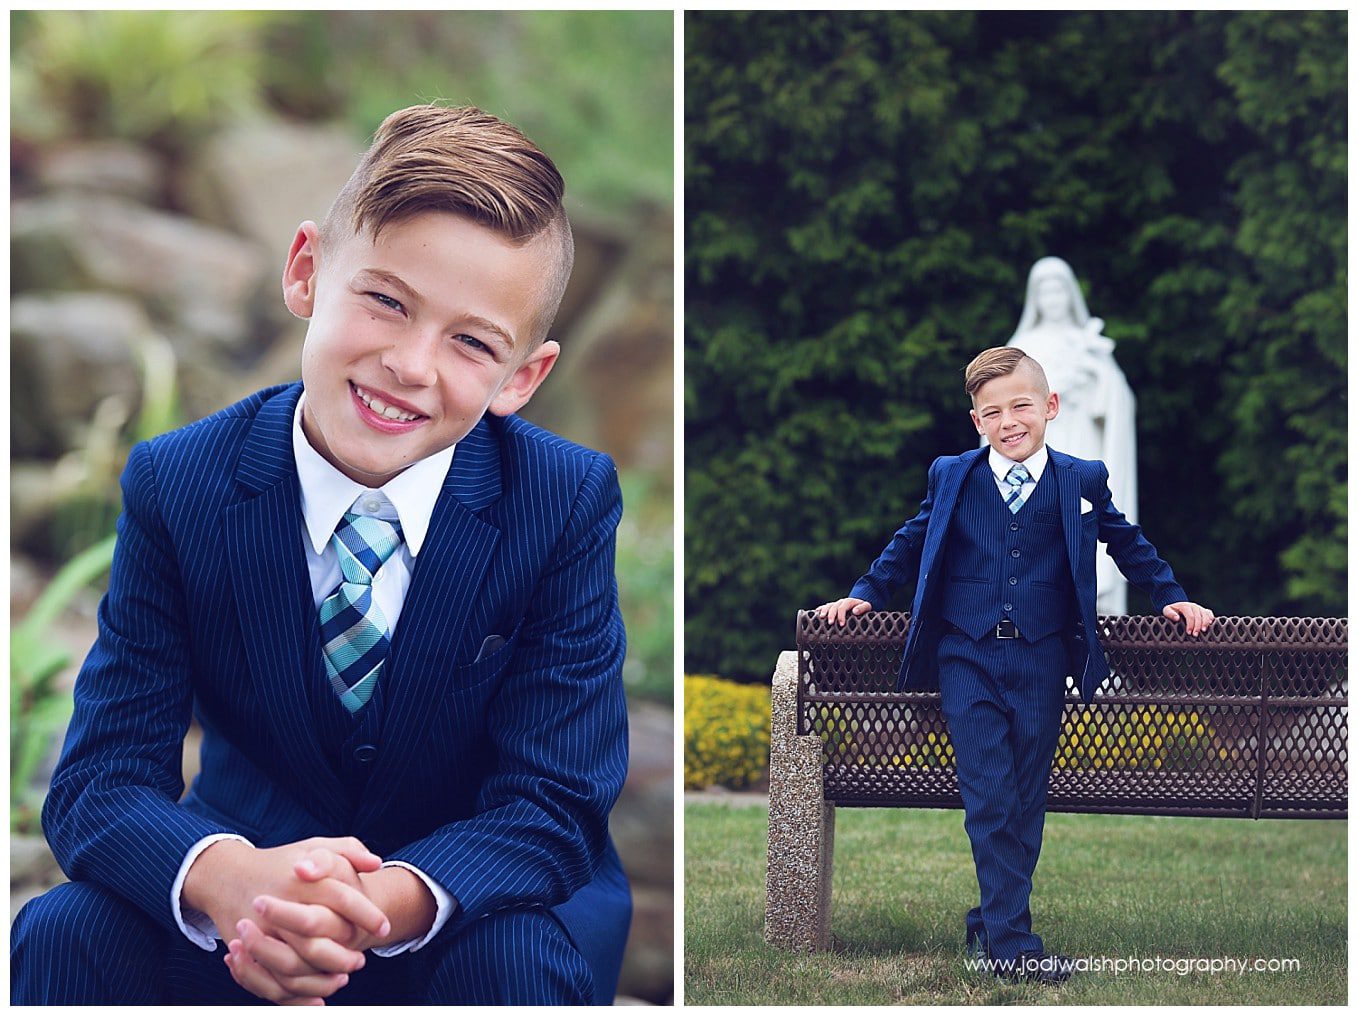 collage of images of young boy wearing a blue suit seated and smiling and standing in front of a white statue in a garden